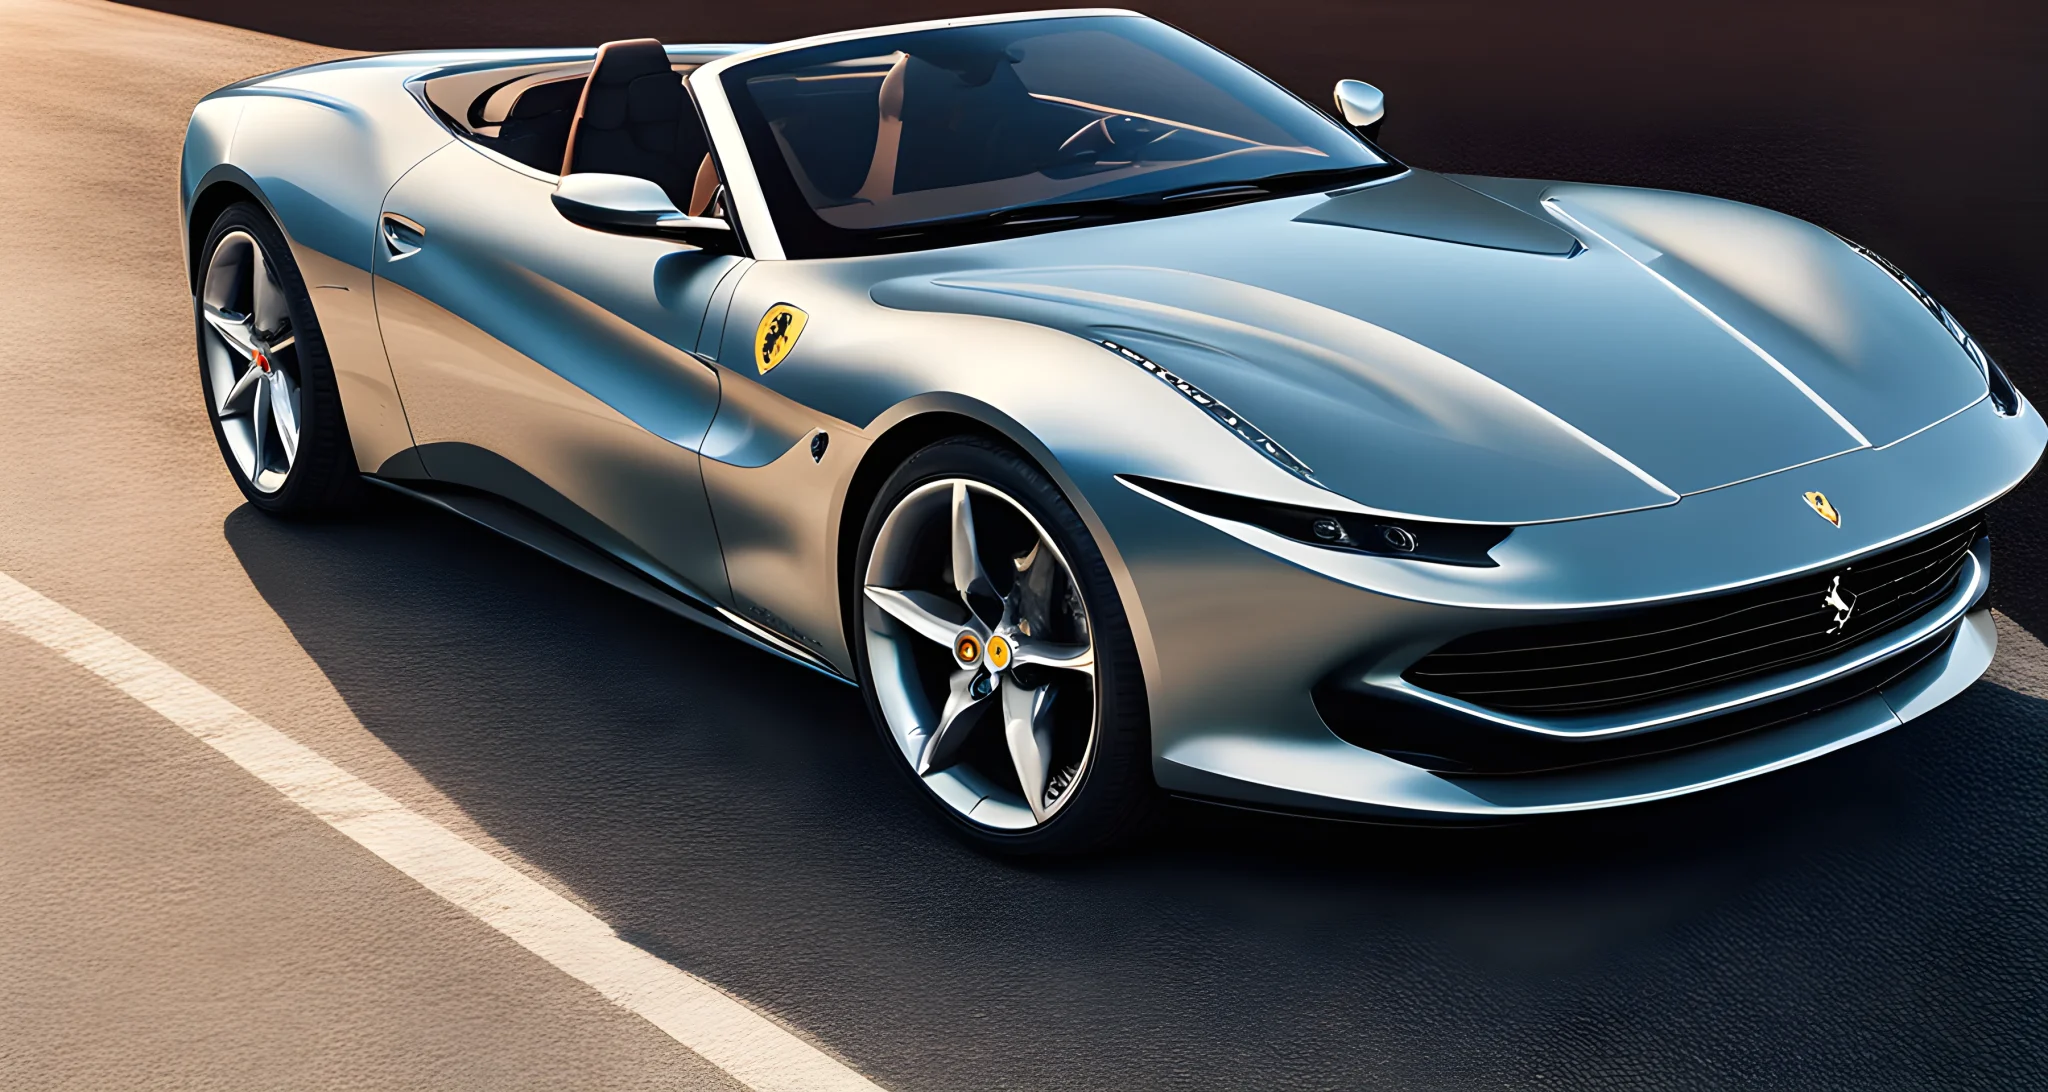 The image shows the 2024 Ferrari Roma Spider, a sleek convertible sports car with a silver exterior.